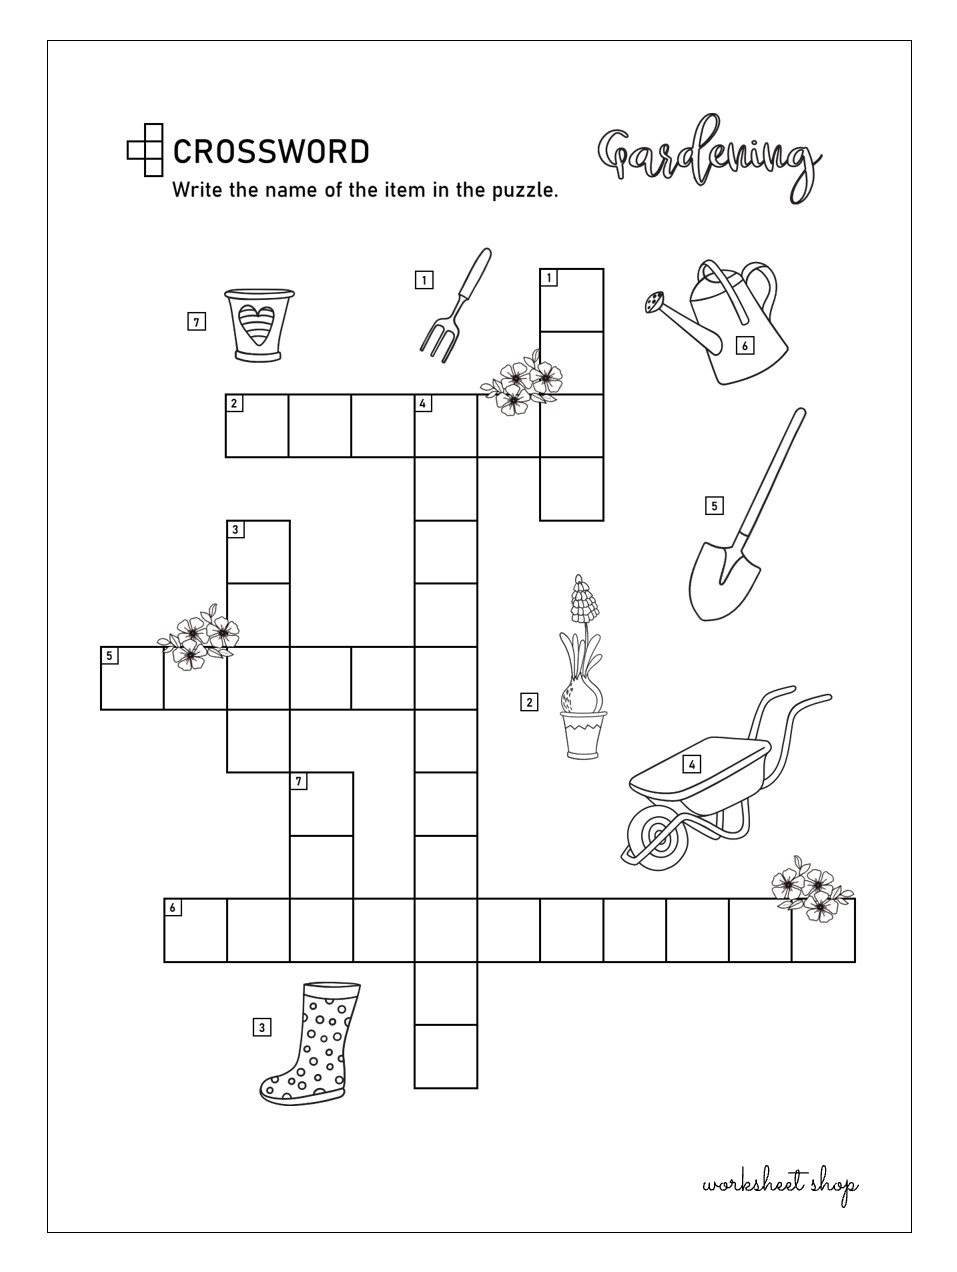 Puzzles Worksheet Shop - Free Easy Printable Crossword Puzzles For Kids